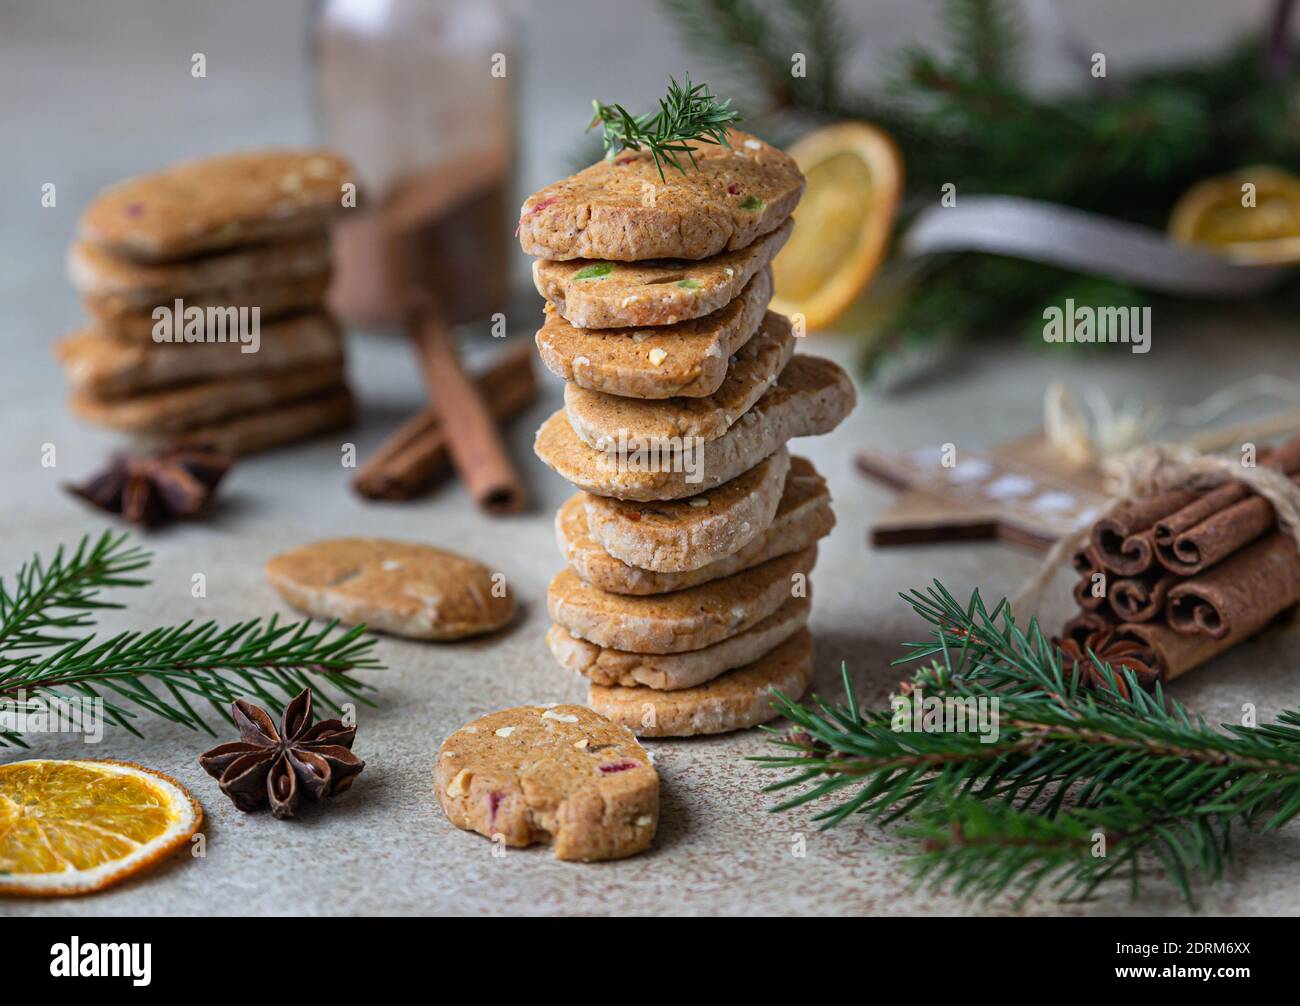 Stacked spicy butter cookies with candied fruits, cinnamon sticks and anise. Festive Christmas or New Year background with fir branches and dried oran Stock Photo